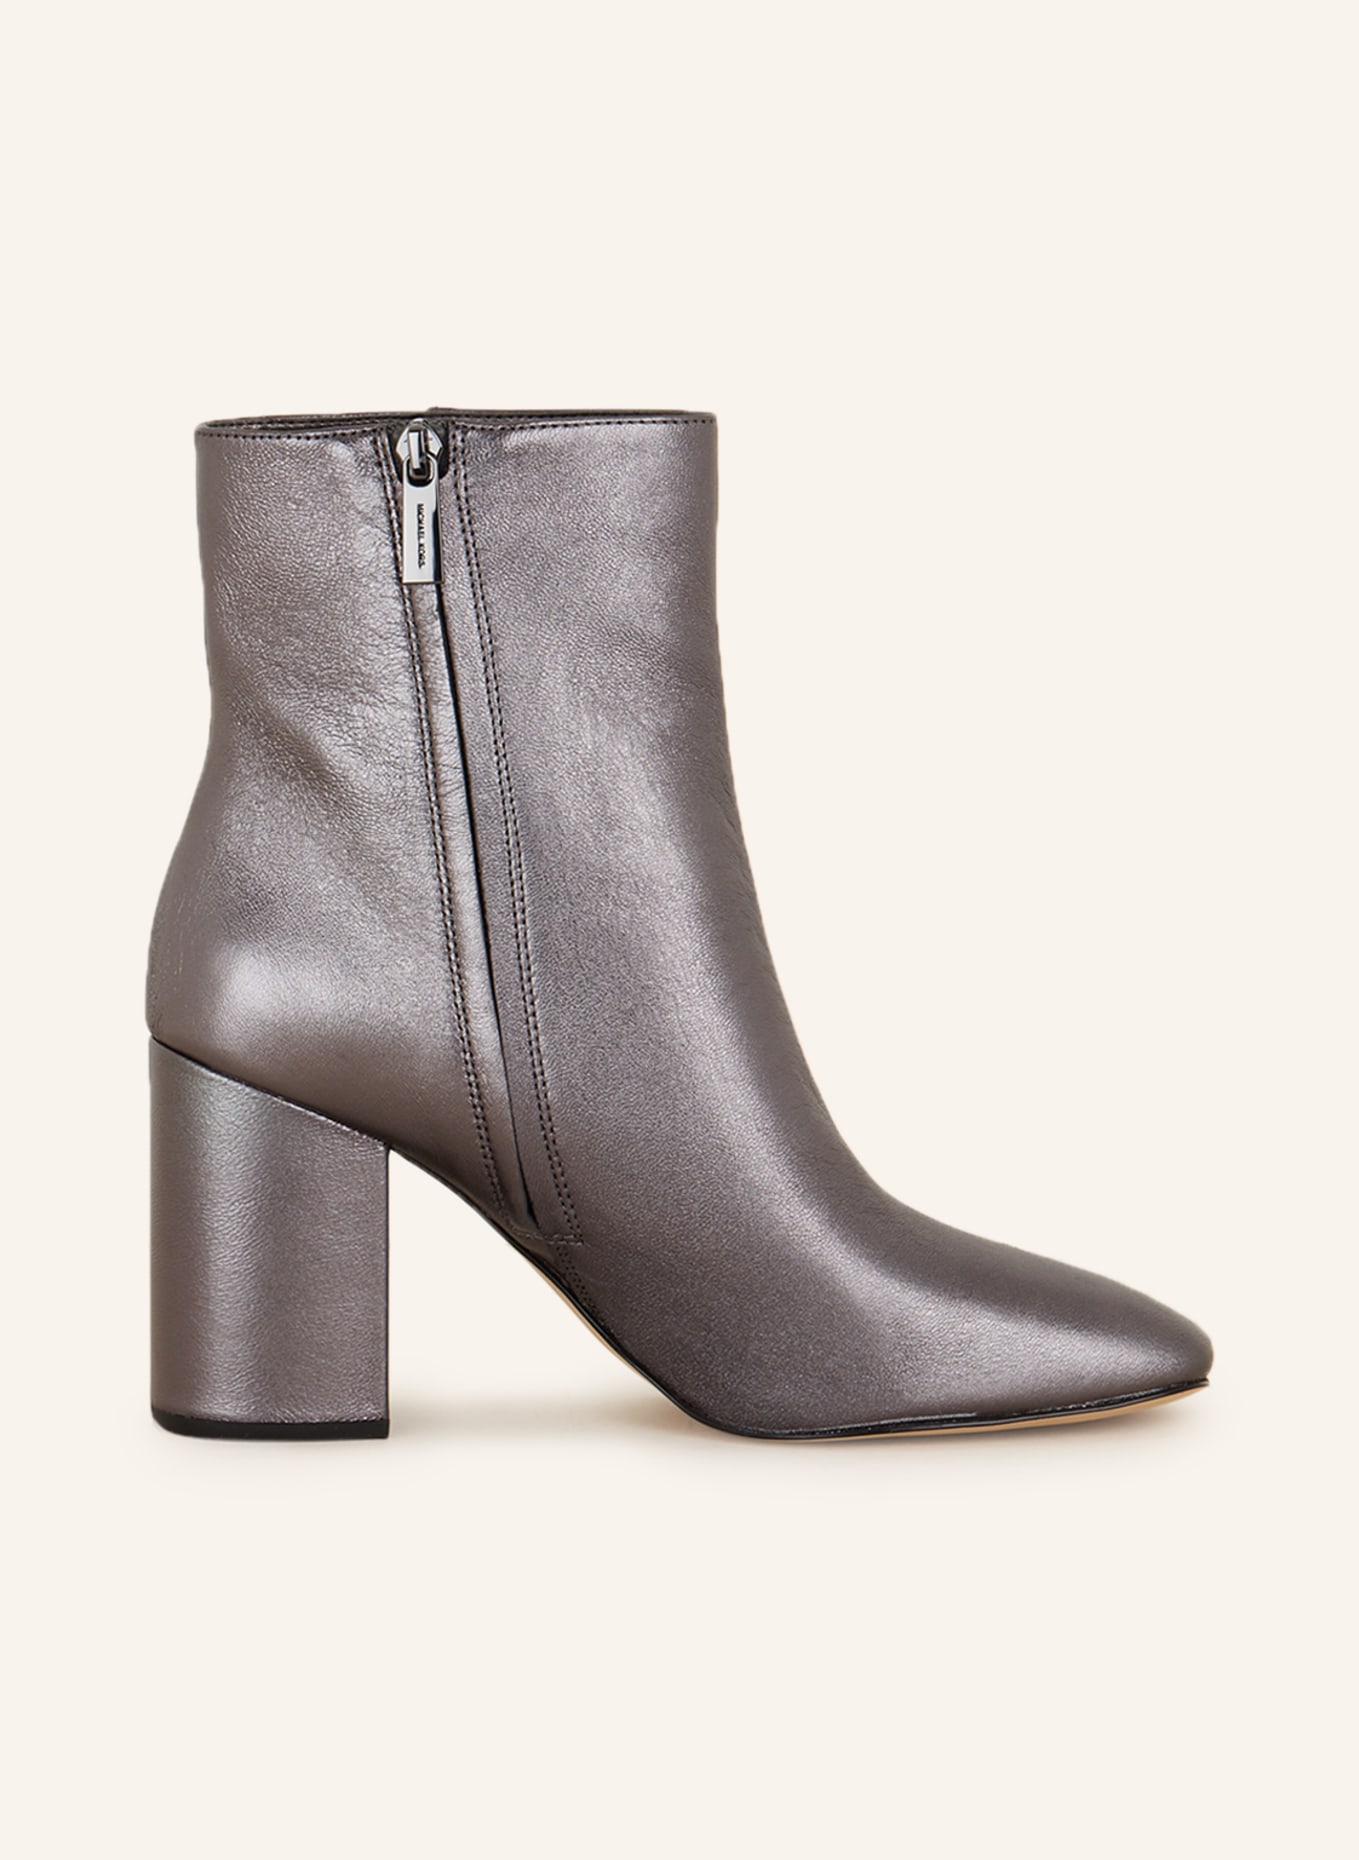 MICHAEL KORS Ankle boots, Color: 021 ANTRACITE (Image 5)